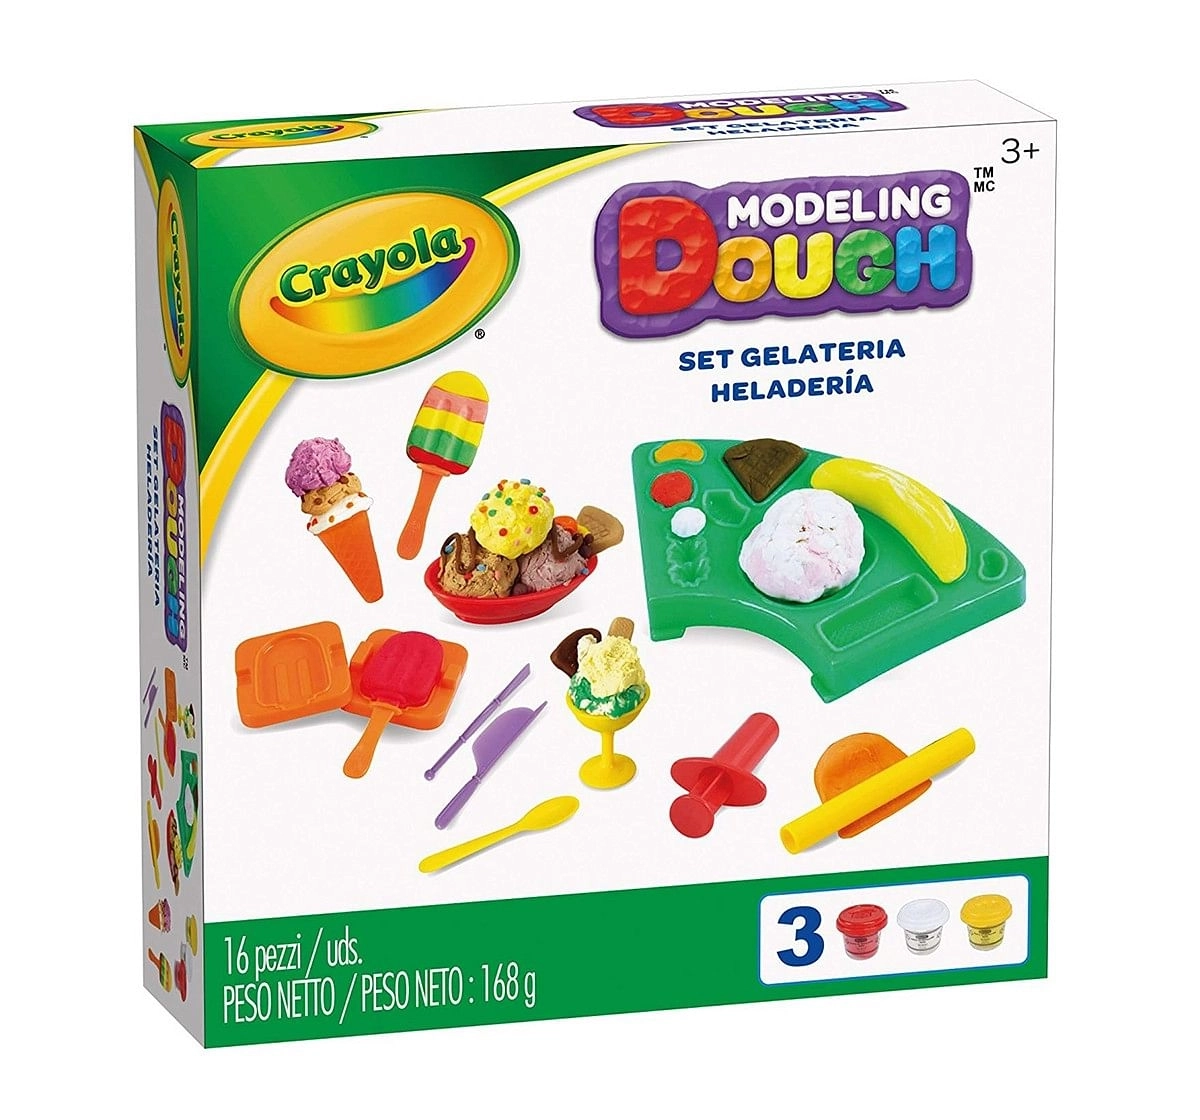 Crayola Modeling Dough Ice Cream Parlor Kit - 16 Pieces Clay & Dough for Kids age 3Y+ 